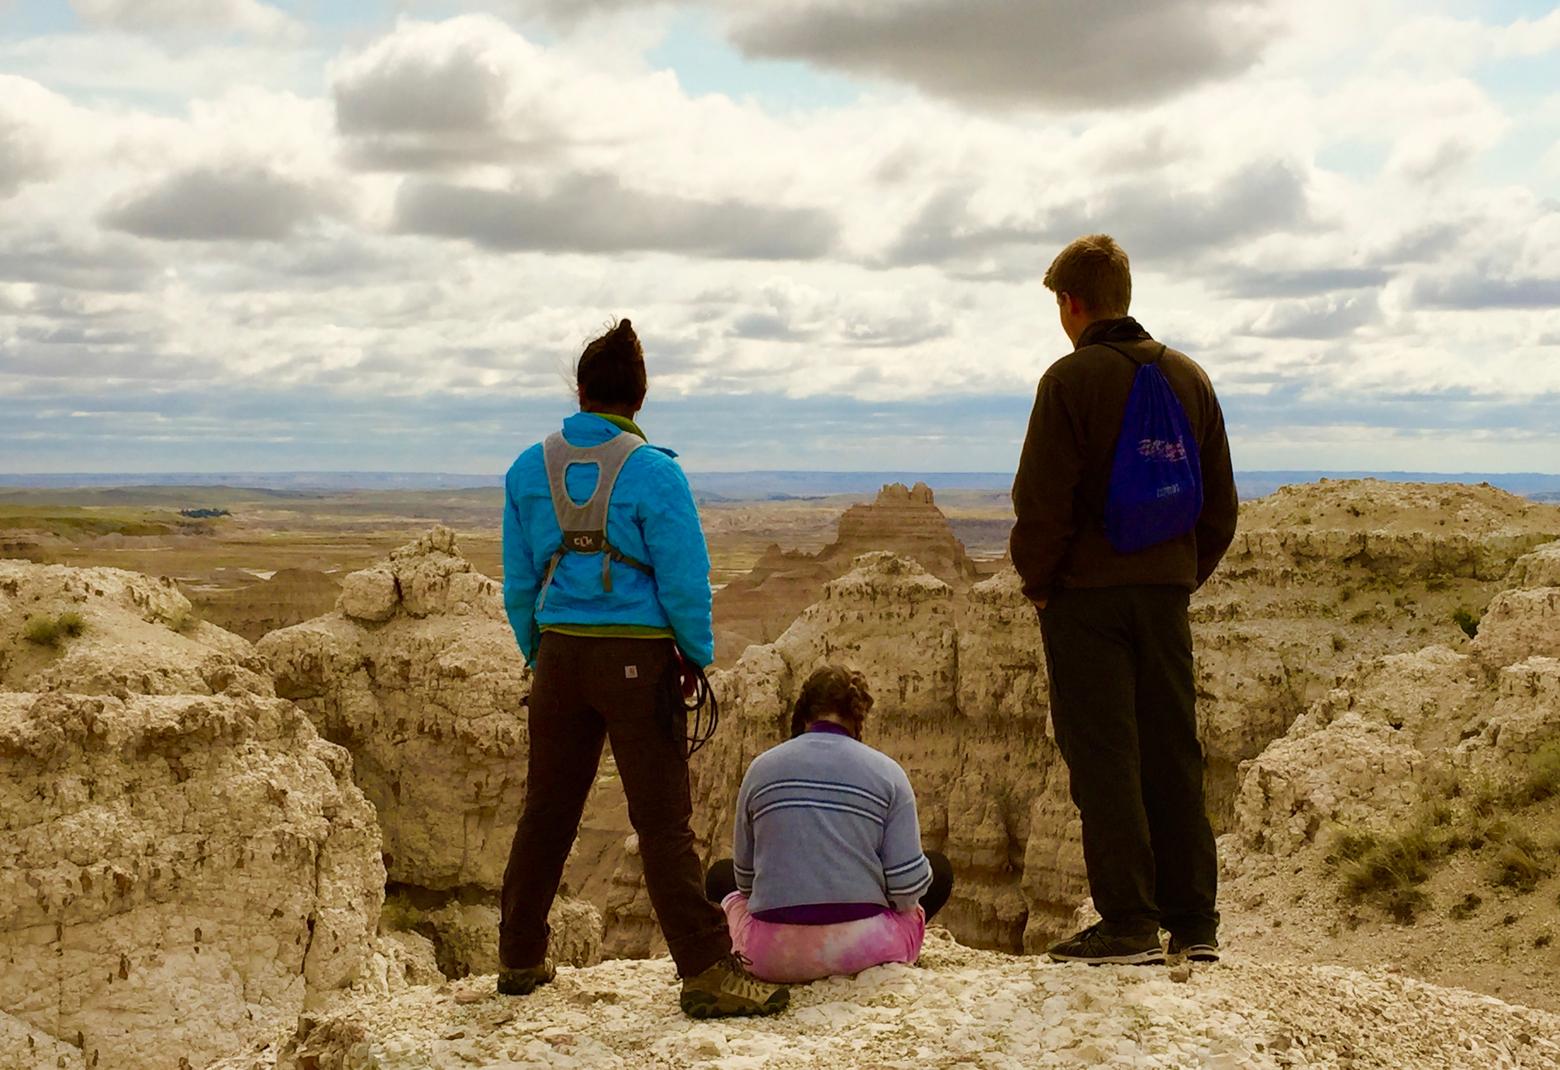 Gazing into the maw of the South Unit of Badlands National Park in South Dakota, students from Whitman College are encouraged  to reflect upon and challenge conventional notions of "the West," including whose voices have been left out of discussions and history books. The South Unit of Badlands today is co-managed between the Oglala (Lakota) Nation and the National Park Service. Photo courtesy Todd Wilkinson